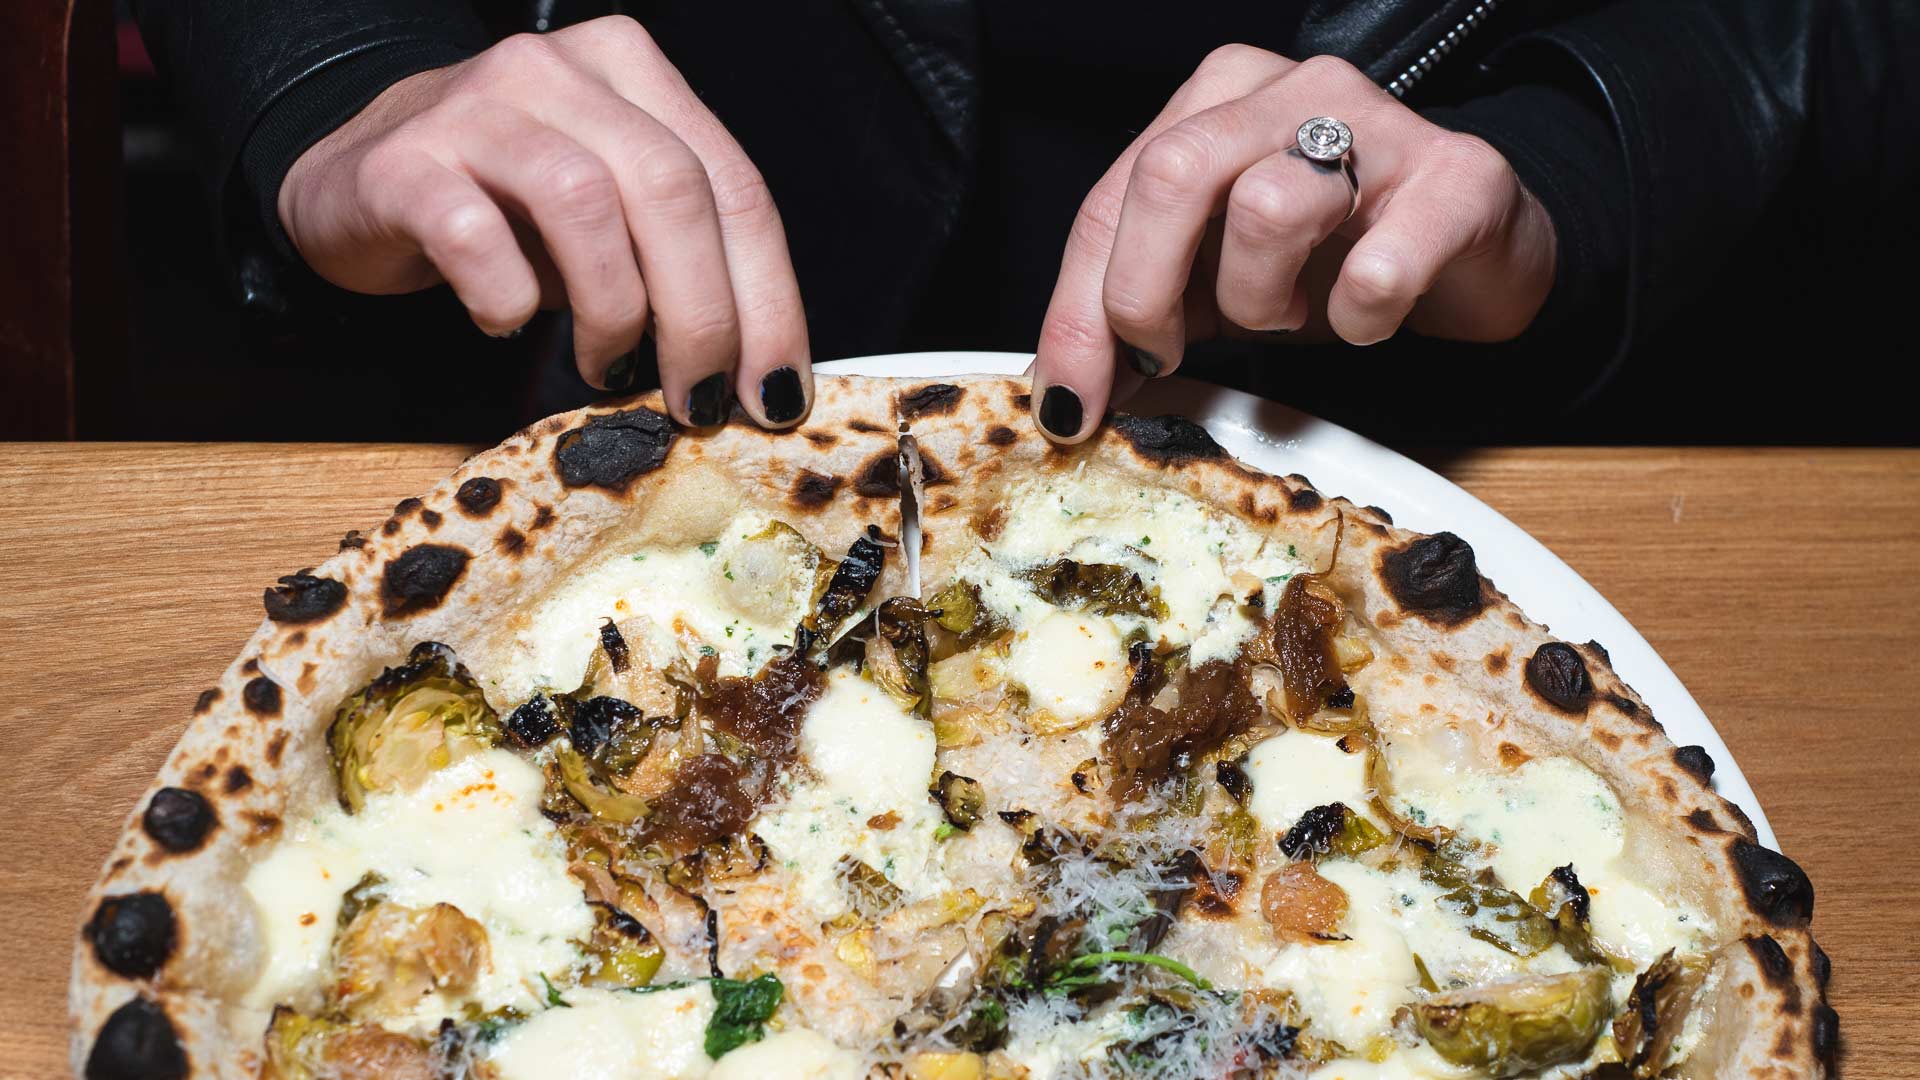 Surry Hills' Beloved Dimitri's Is Reopening as a Three-Level Pizza Joint and Bar on Oxford Street